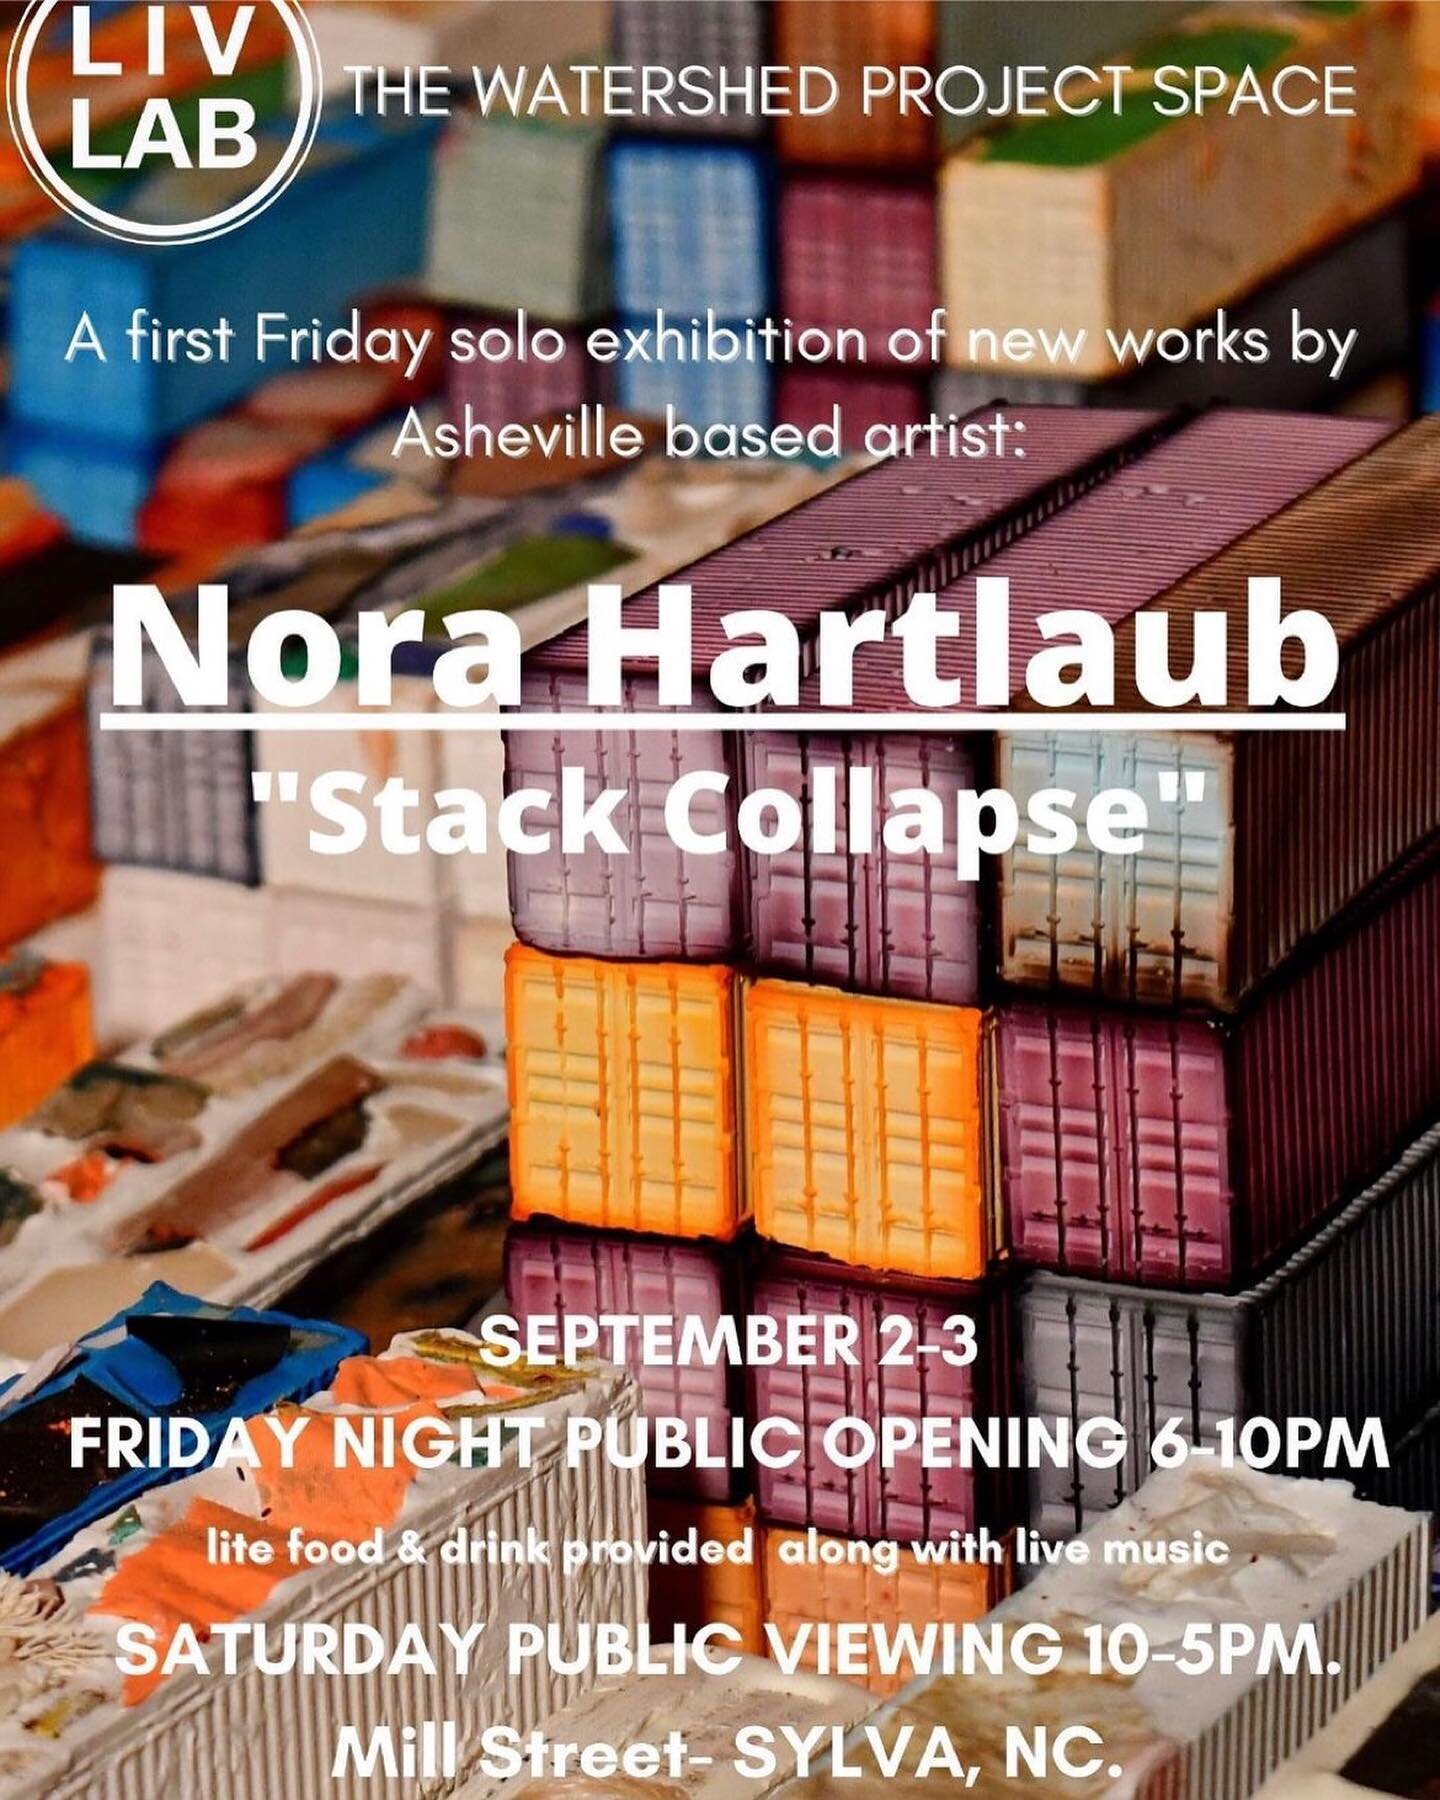 &ldquo;Stack Collapse&rdquo;, a new installation by
Asheville based artist Nora Hartlaub .  Friday 8/2, 6 - 10pm 
Rice and beans, Pbr's , friendly folks, great artwork,
@stackcollapse
.
@sylvanc
@wcusoad
#projectspace #sculpture @wcusoad @wculivlab